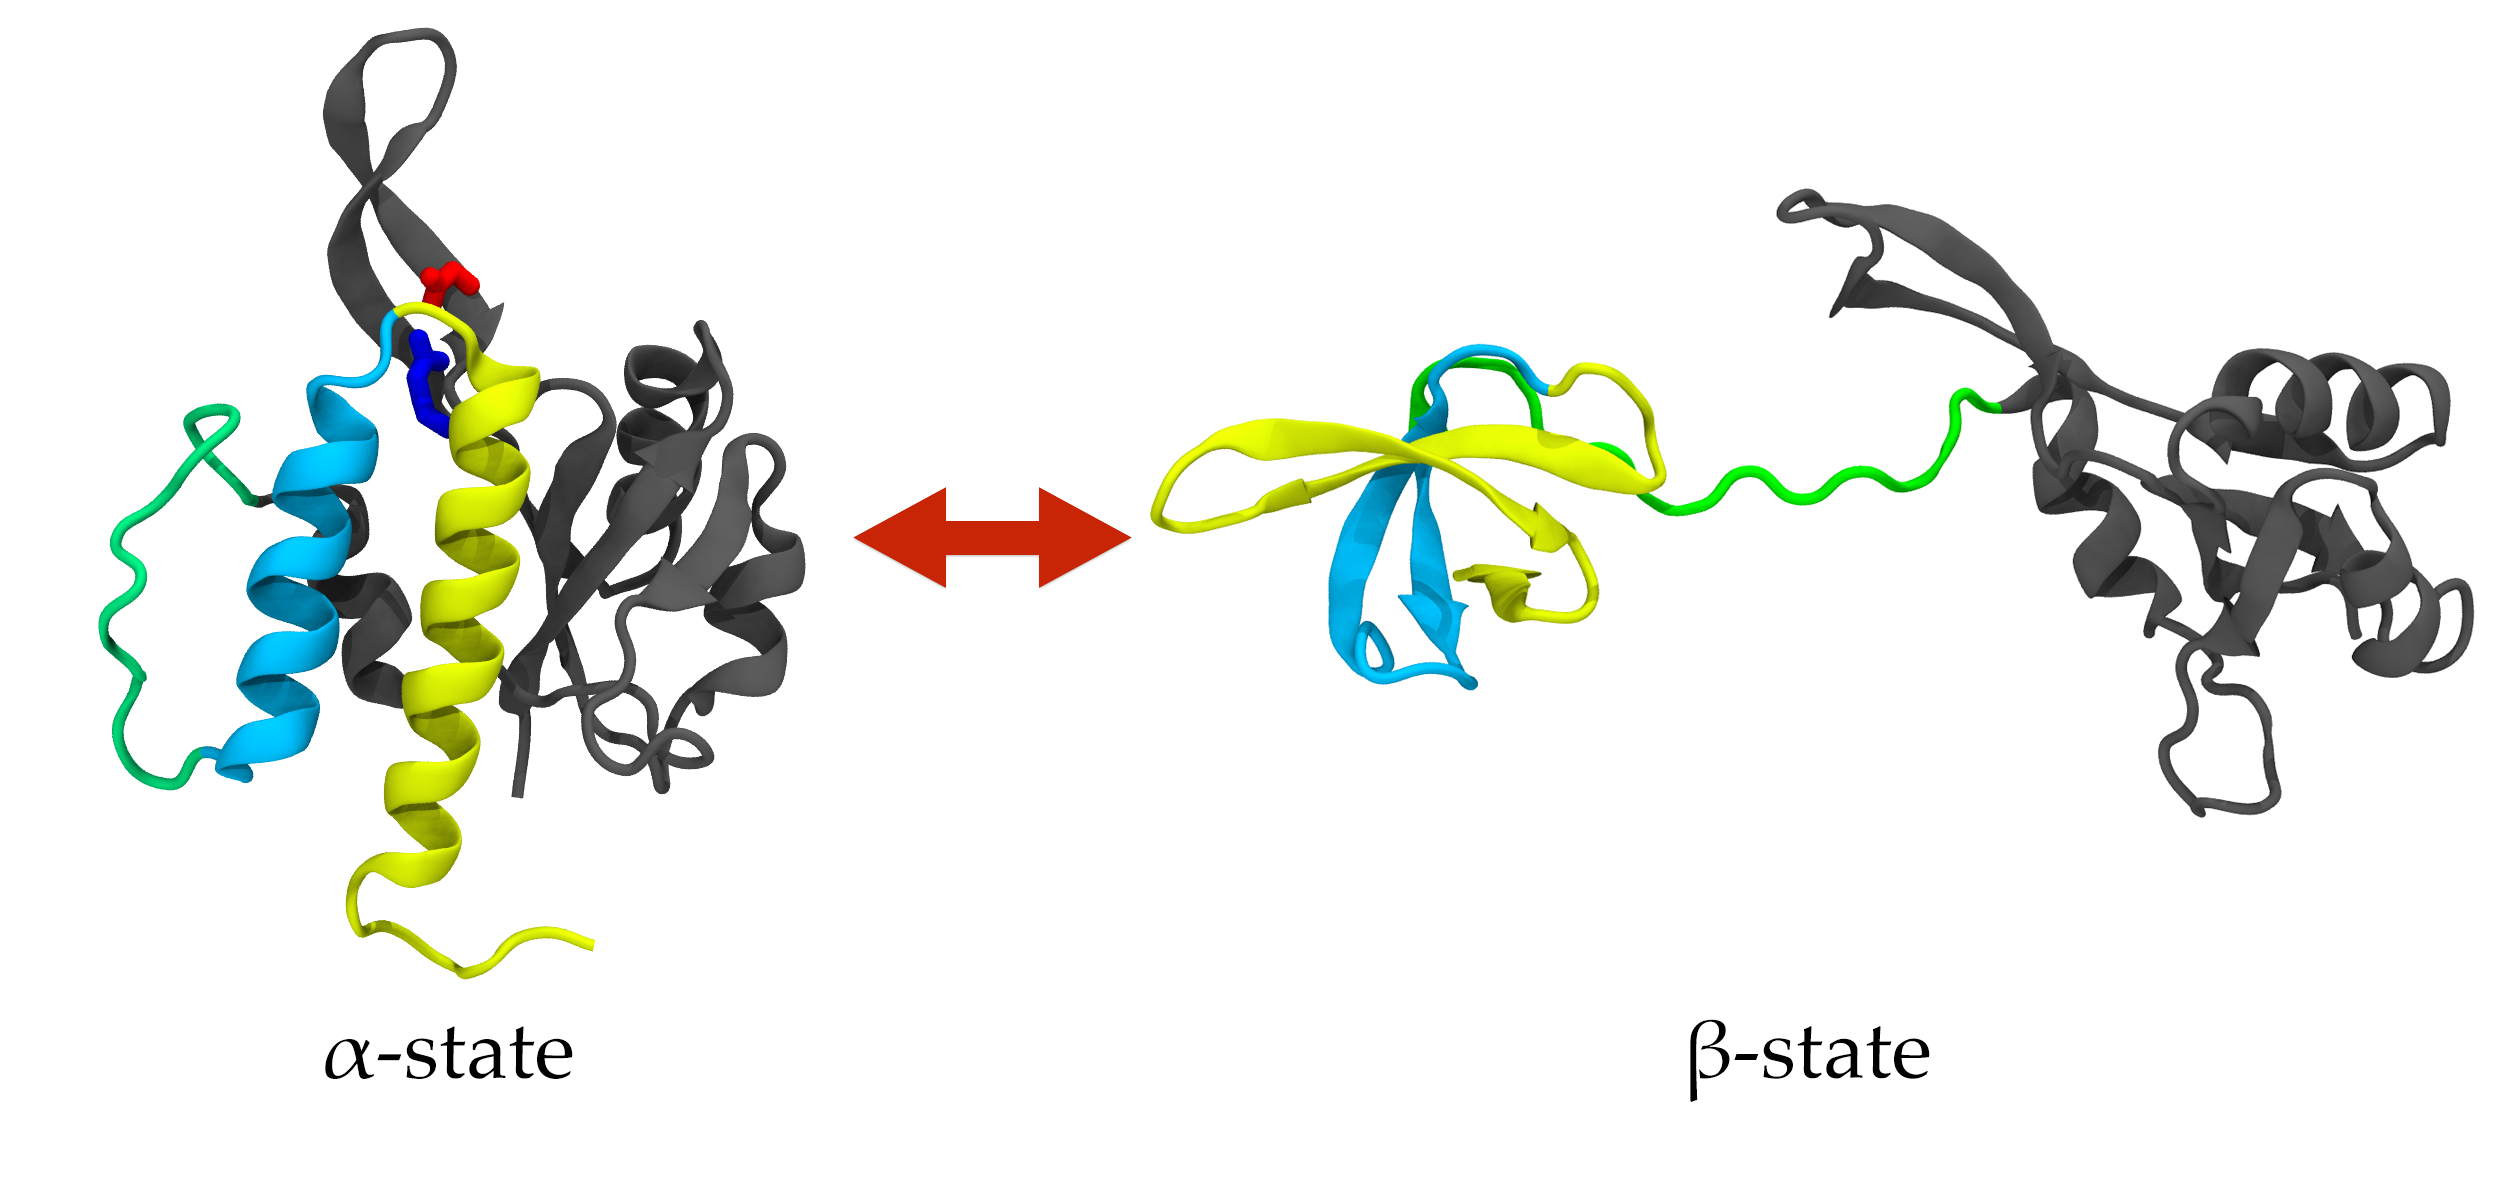 Image 1: The metamorphic protein RfaH can reversibly transition between the autoinhibited state (left) and active state (right). In this cartoon, the N-terminal domain of the protein is colored dark gray, the C-terminal domain is yellow and cyan, and the linker connecting the domains is green.  